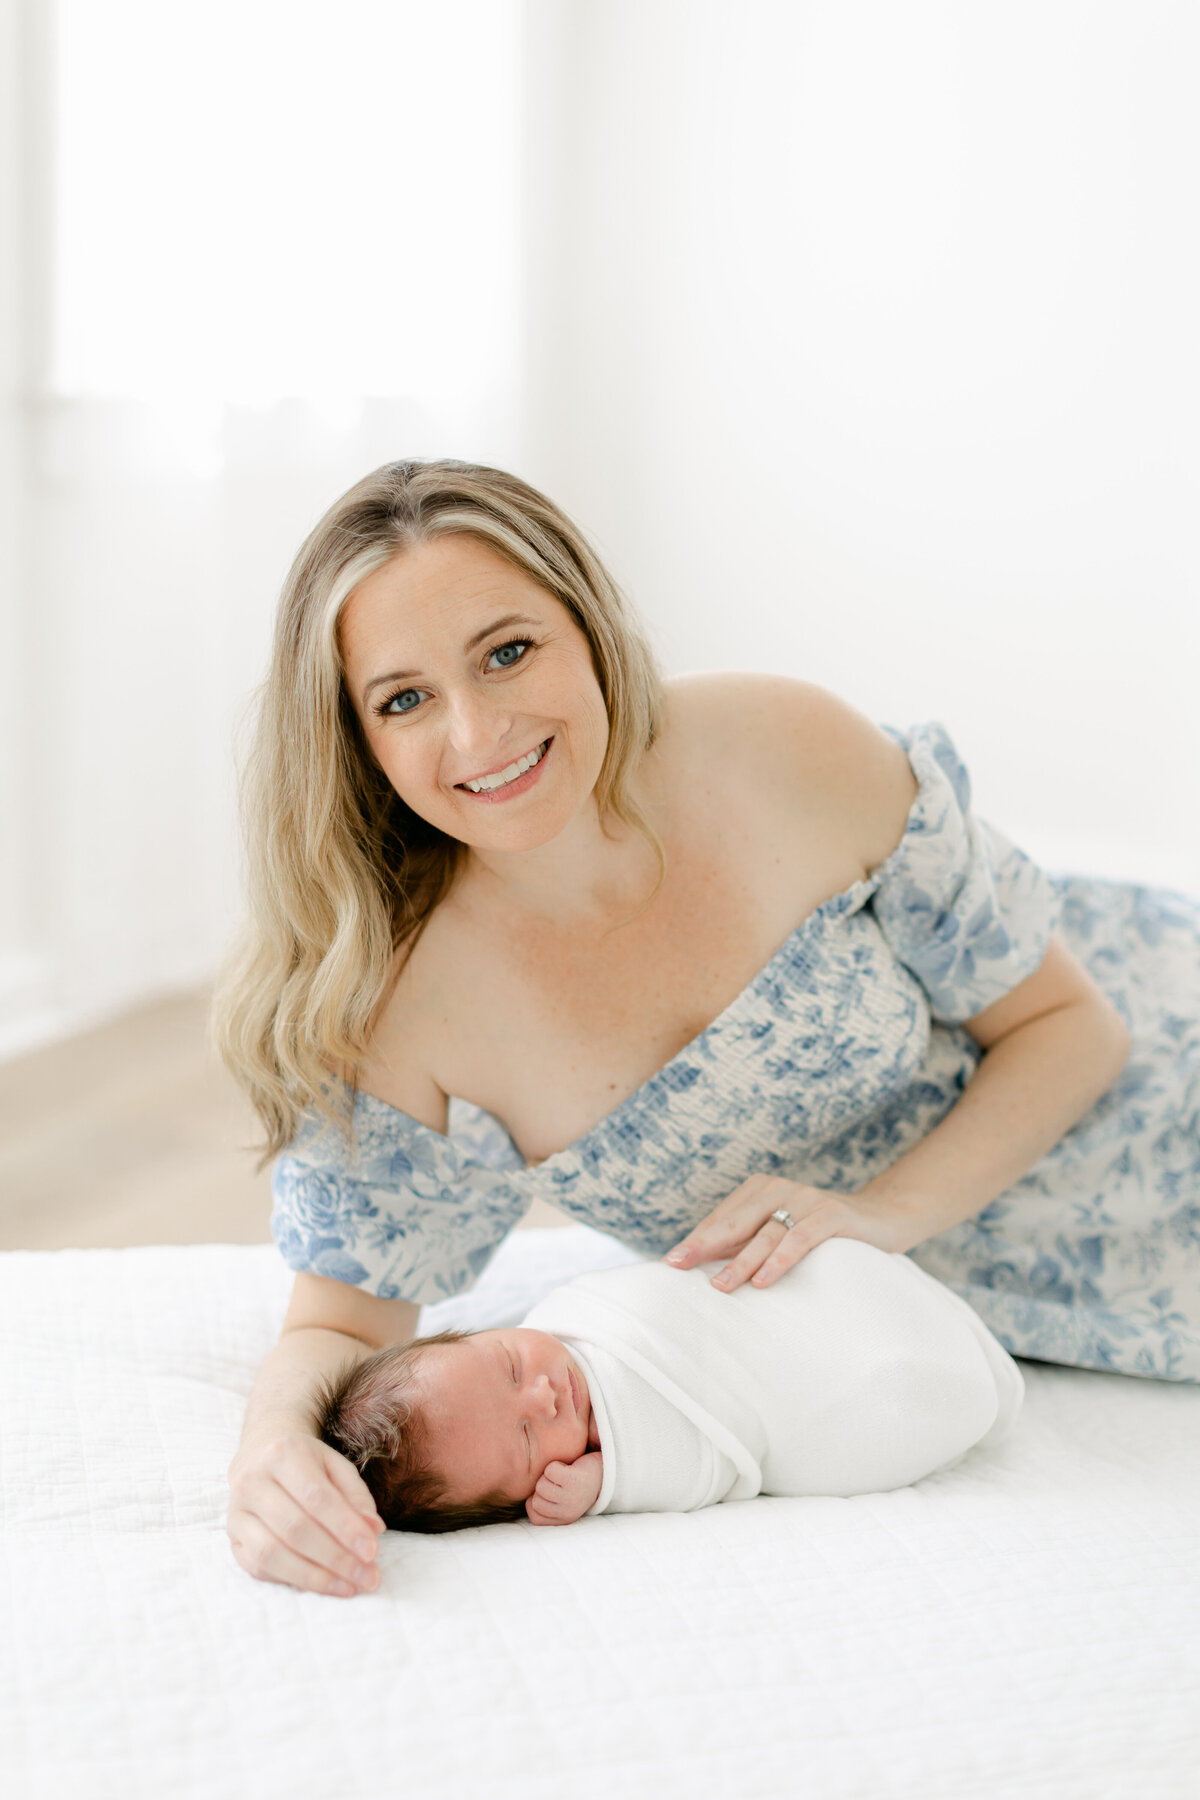 mom laying on a white bed wearing a stunning blue floral pattern dress holding her newborn baby boy photographed by Philadelphia Newborn Photographer Tara Federico